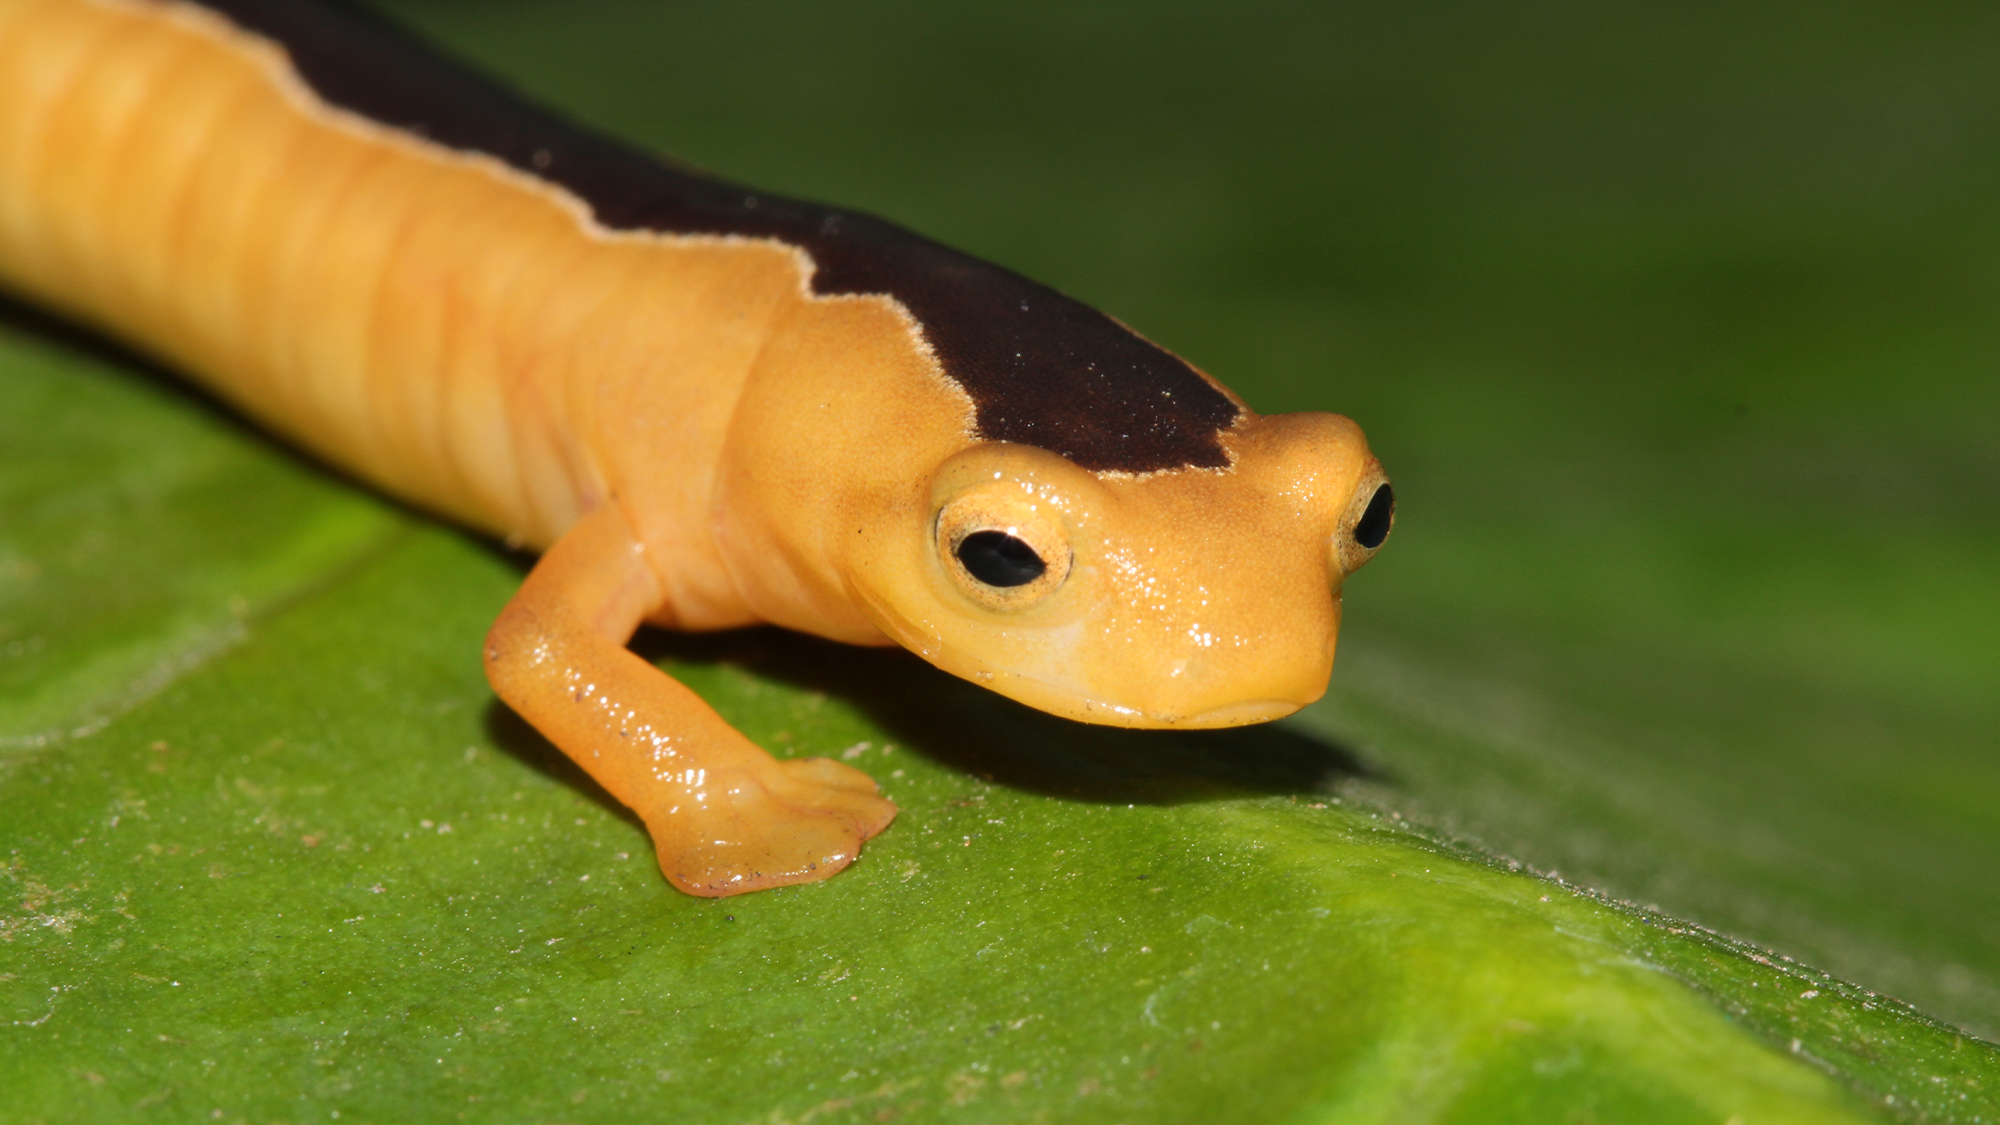 A yellow salamander with a brown stripe on its back sits on a green leaf.